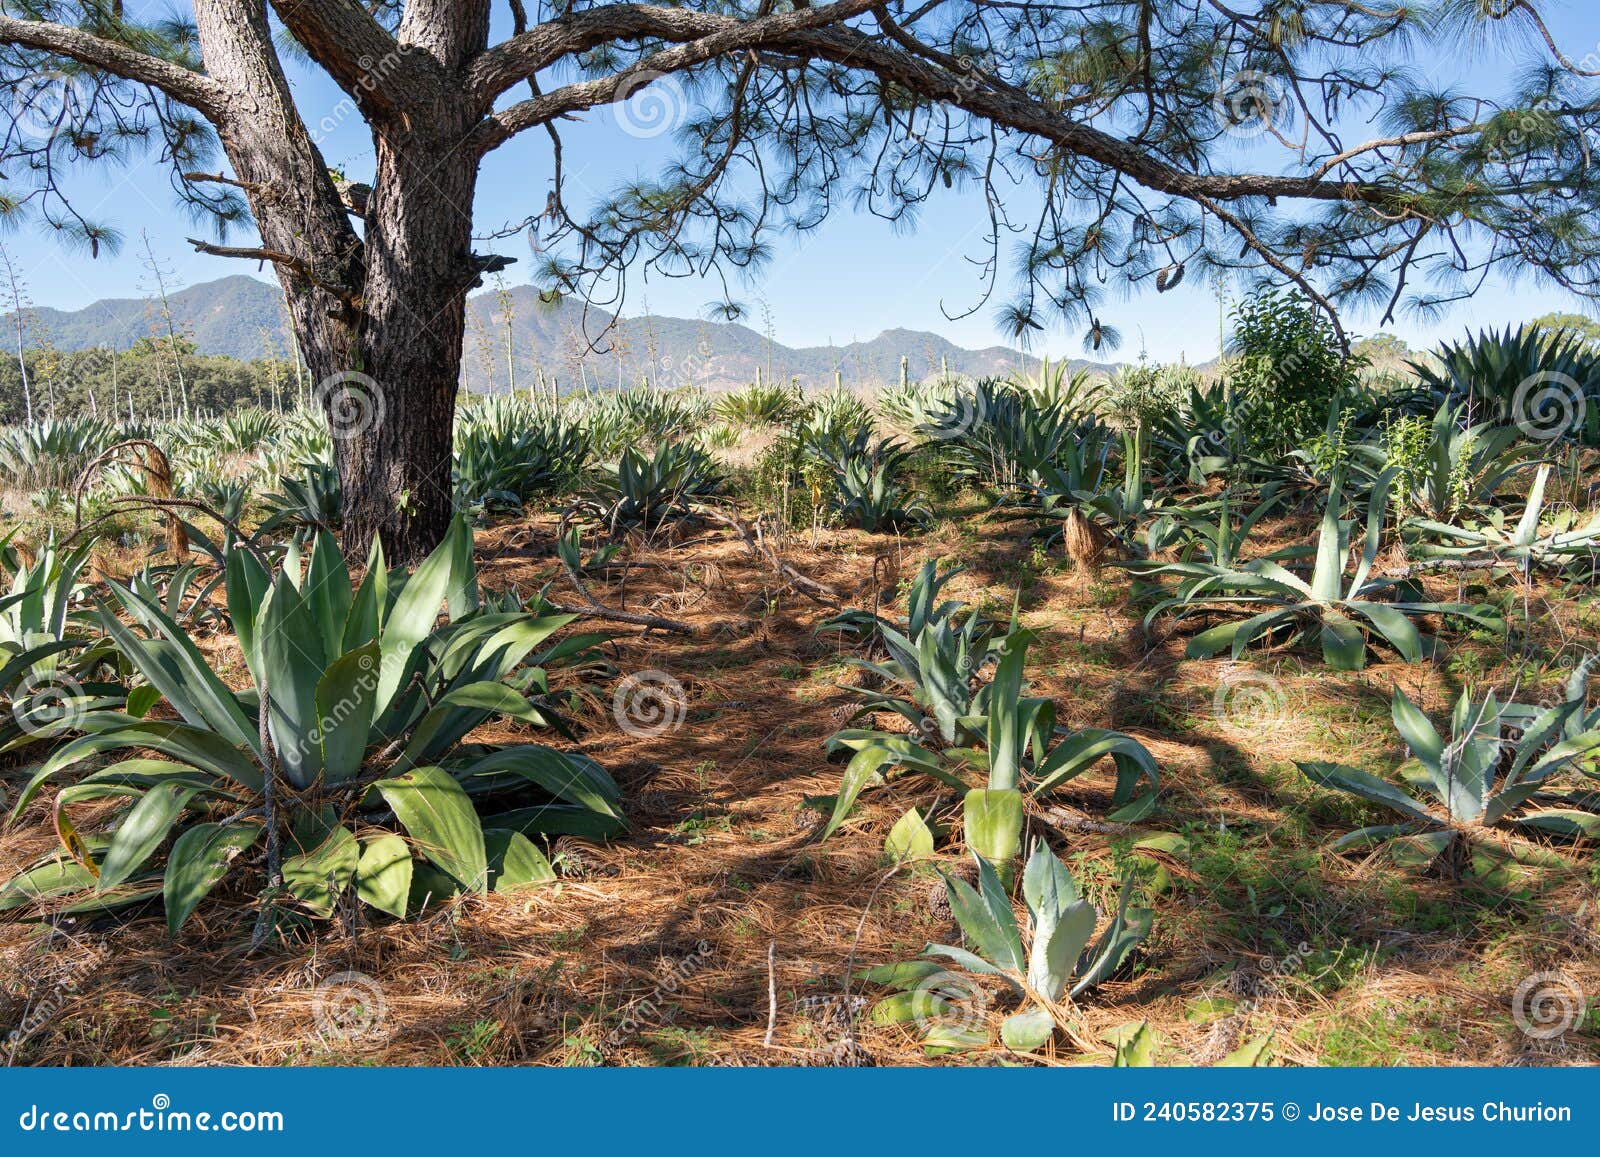 wild field of lechuguilla type agaves to make the alcoholic beverages raicilla and tequila.